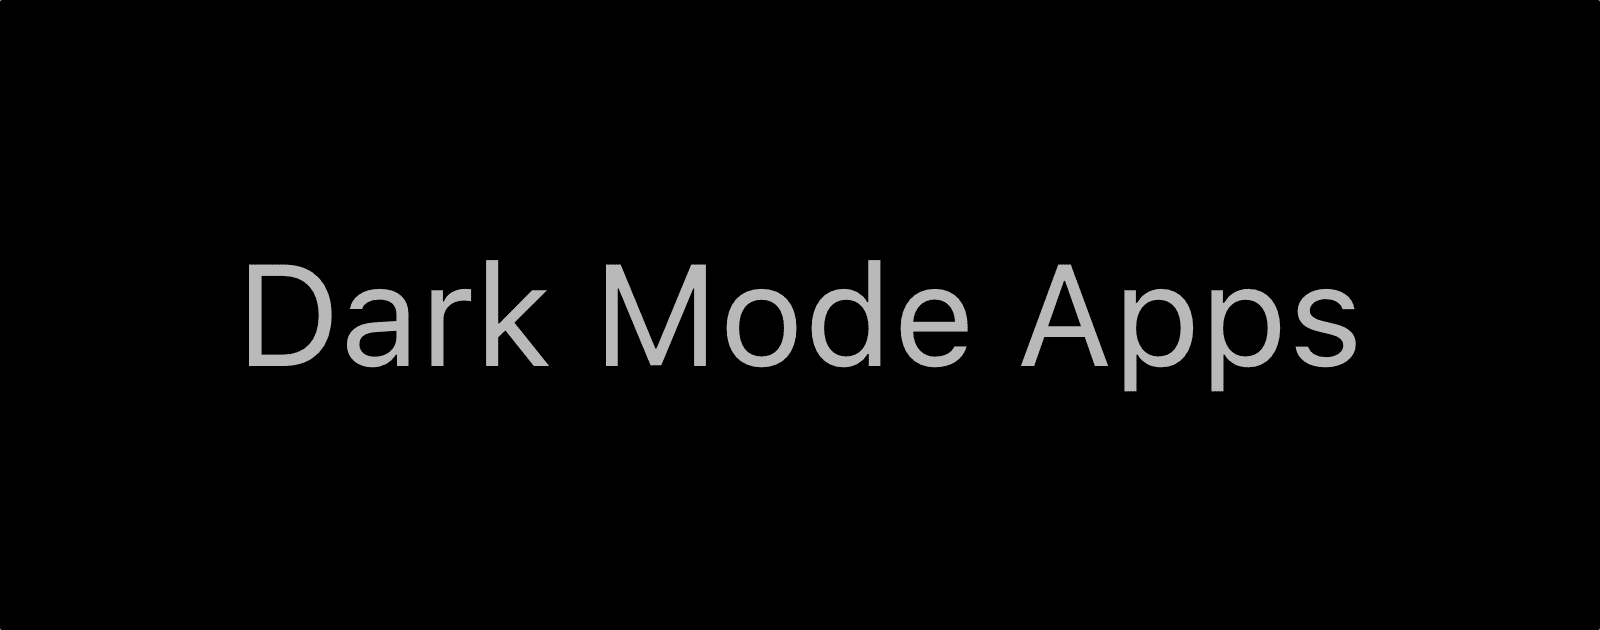 Here’s a List of Dark Mode Apps in macOS Mojave